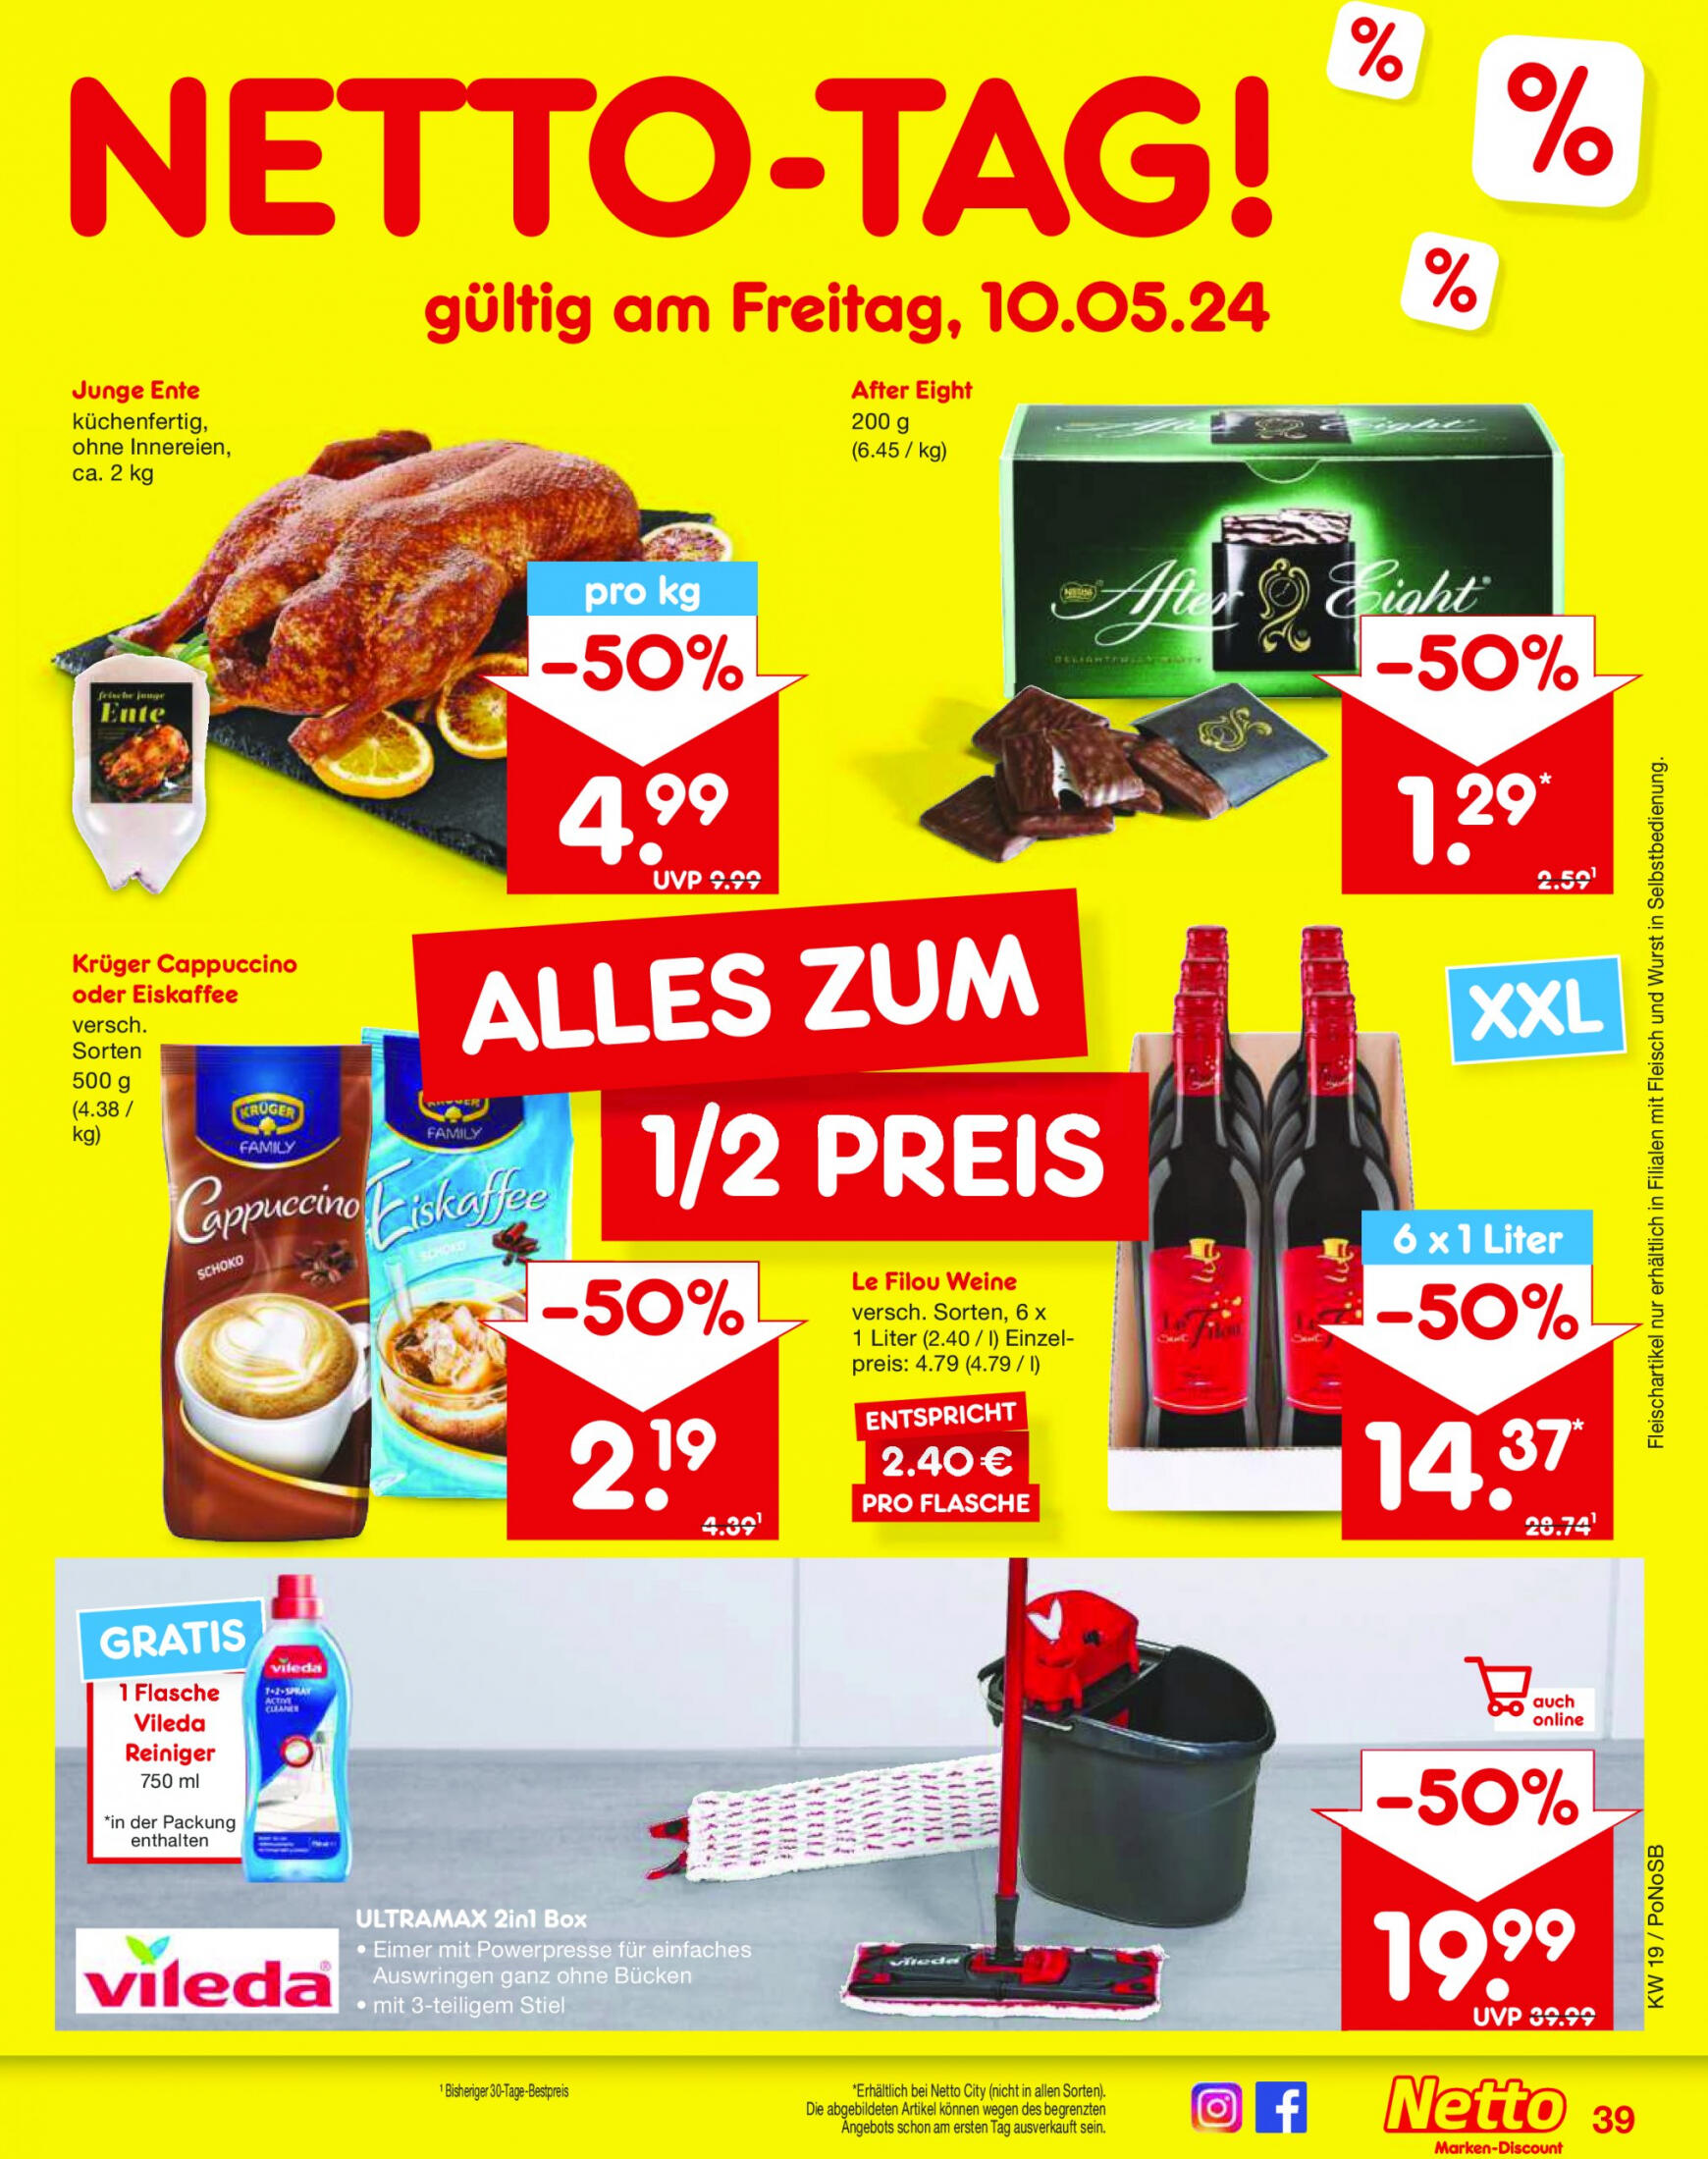 netto - Flyer Netto aktuell 06.05. - 11.05. - page: 49